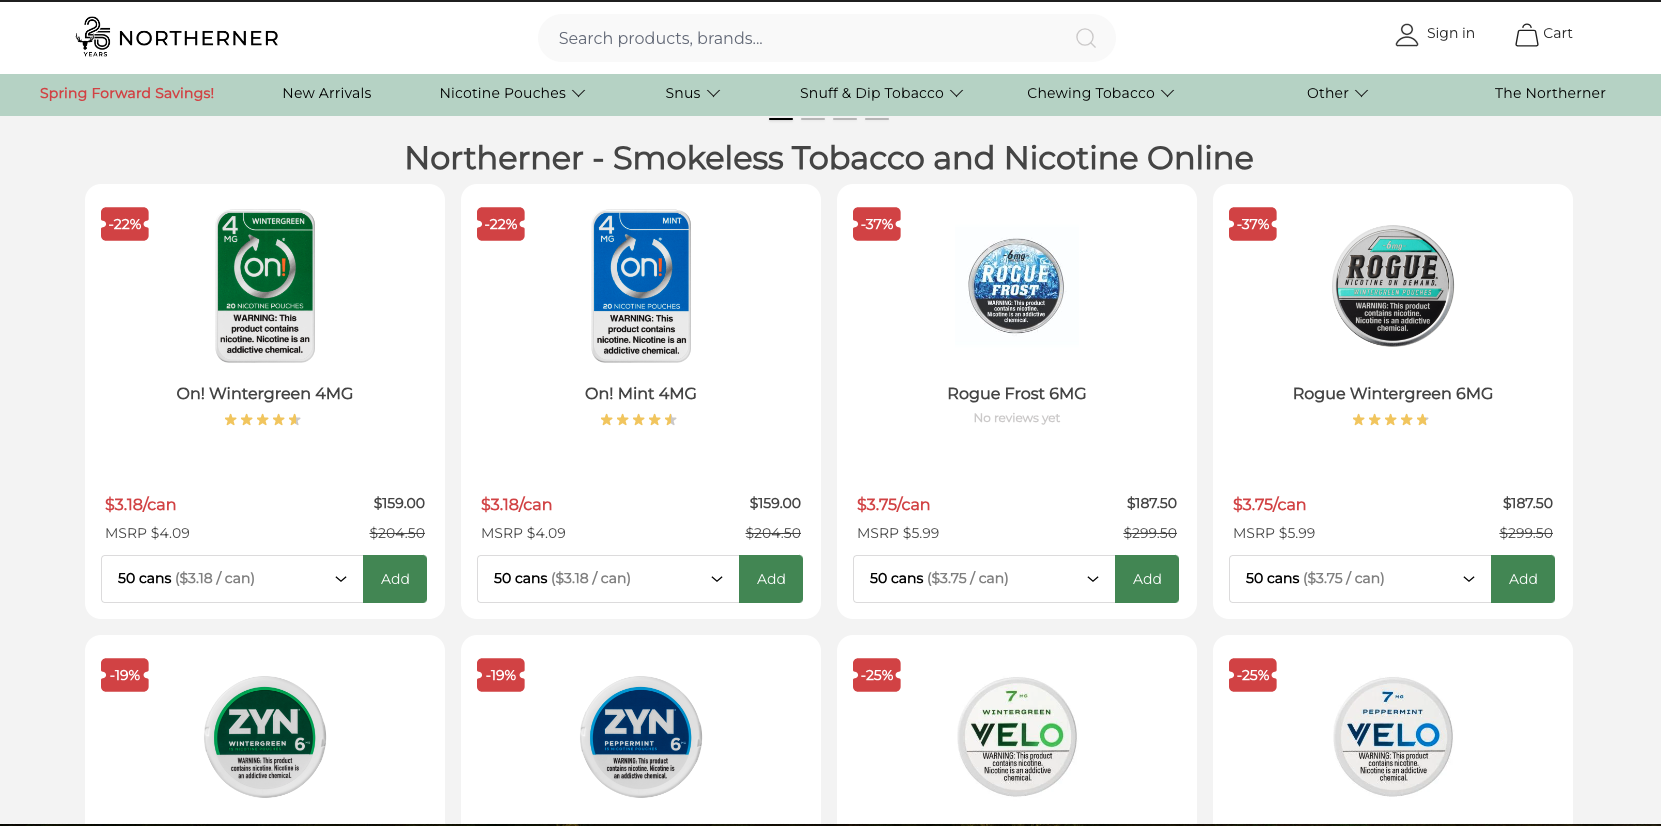 The biggest ecommerce site for snus in the Nordics